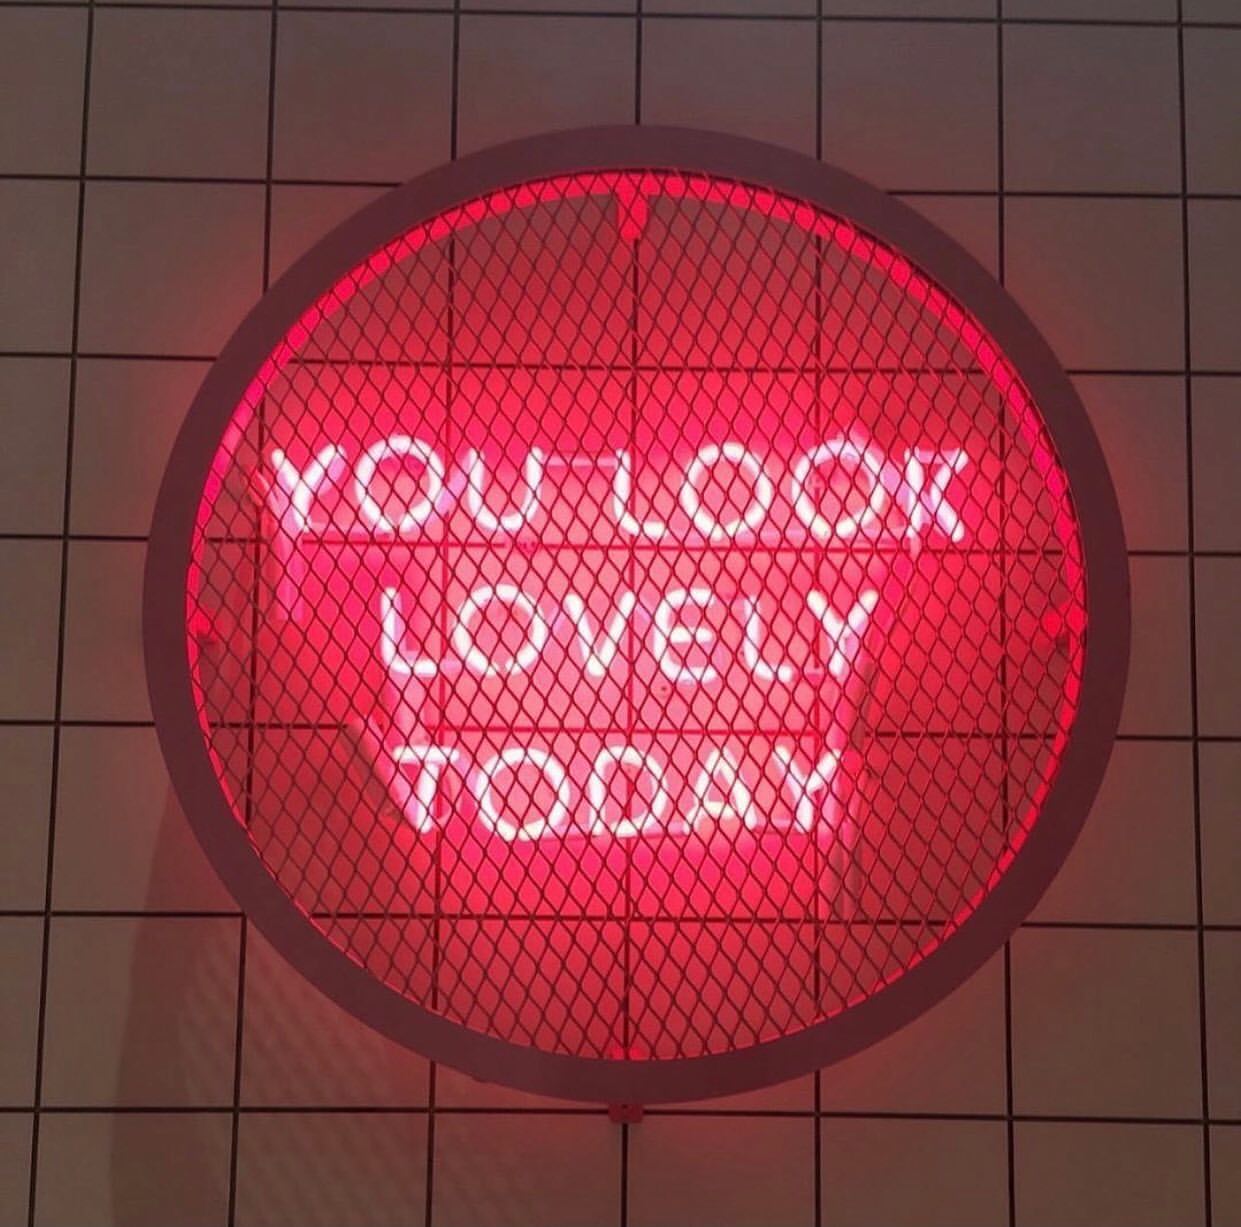 You look lovely today.